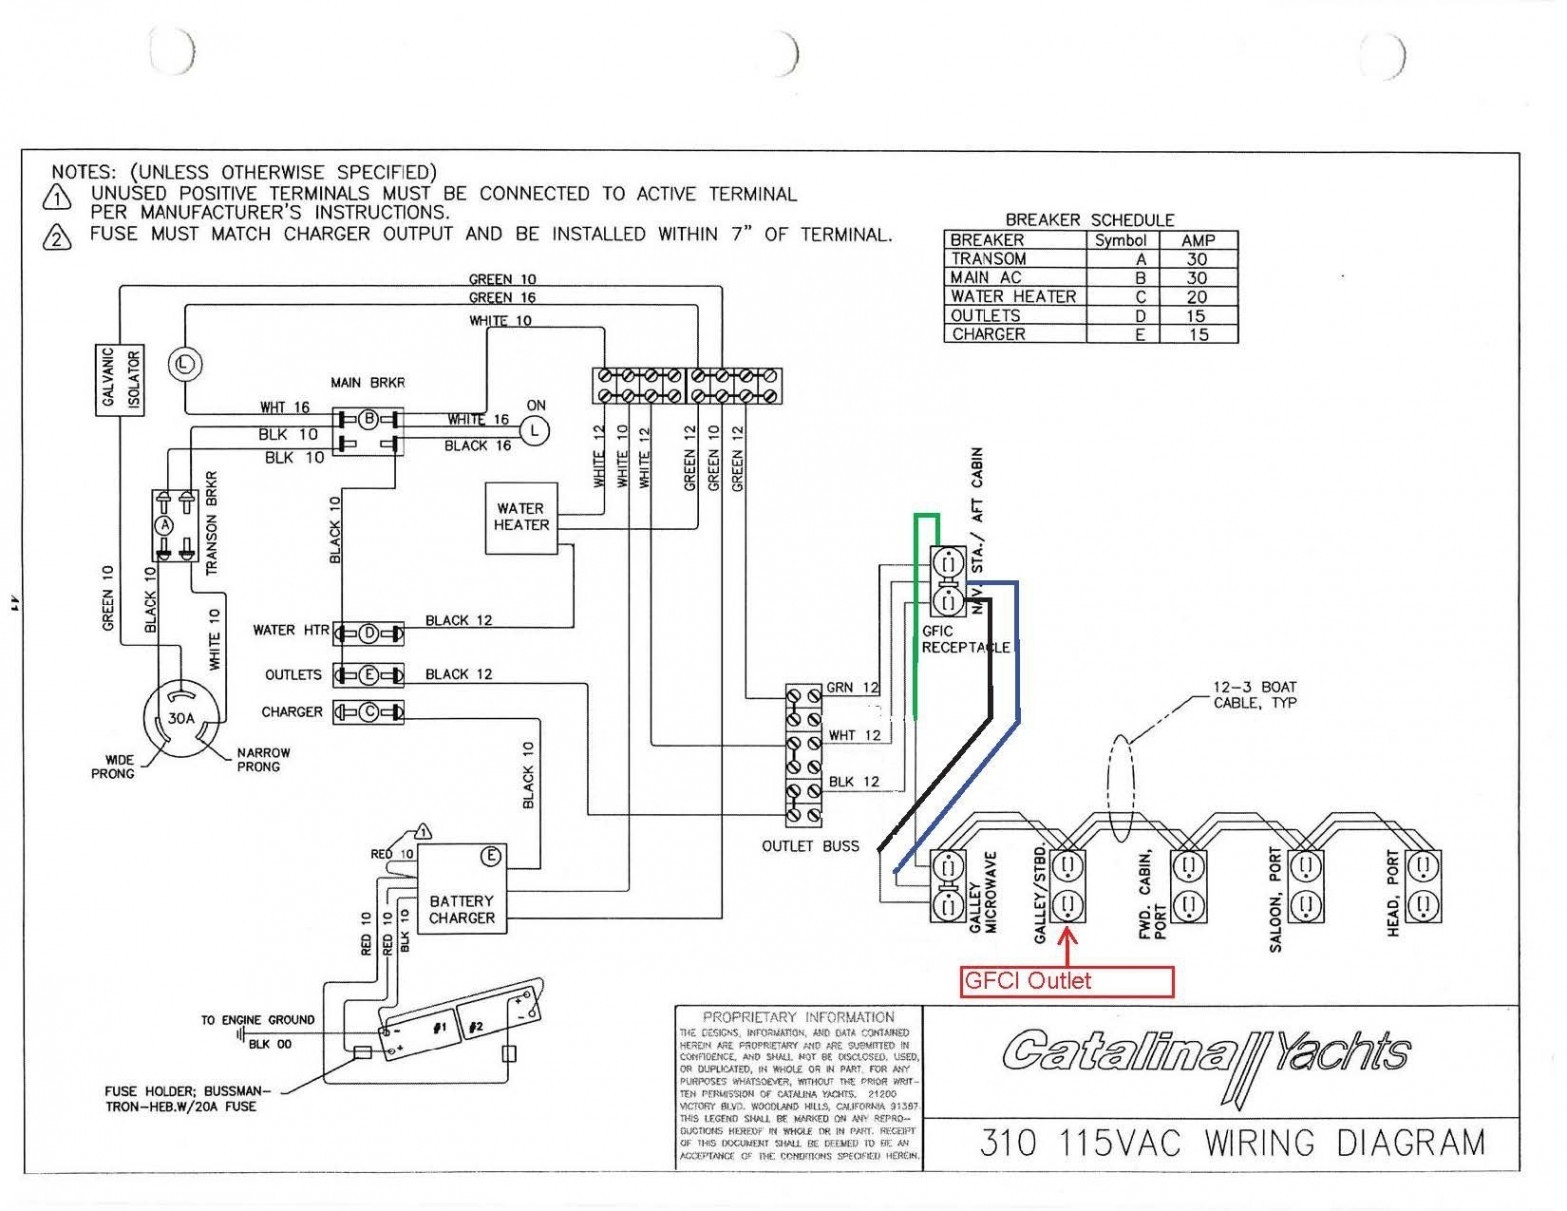 Boat Wiring Diagram – Wire Diagram Software Unique Electrical Wiring Diagram Software